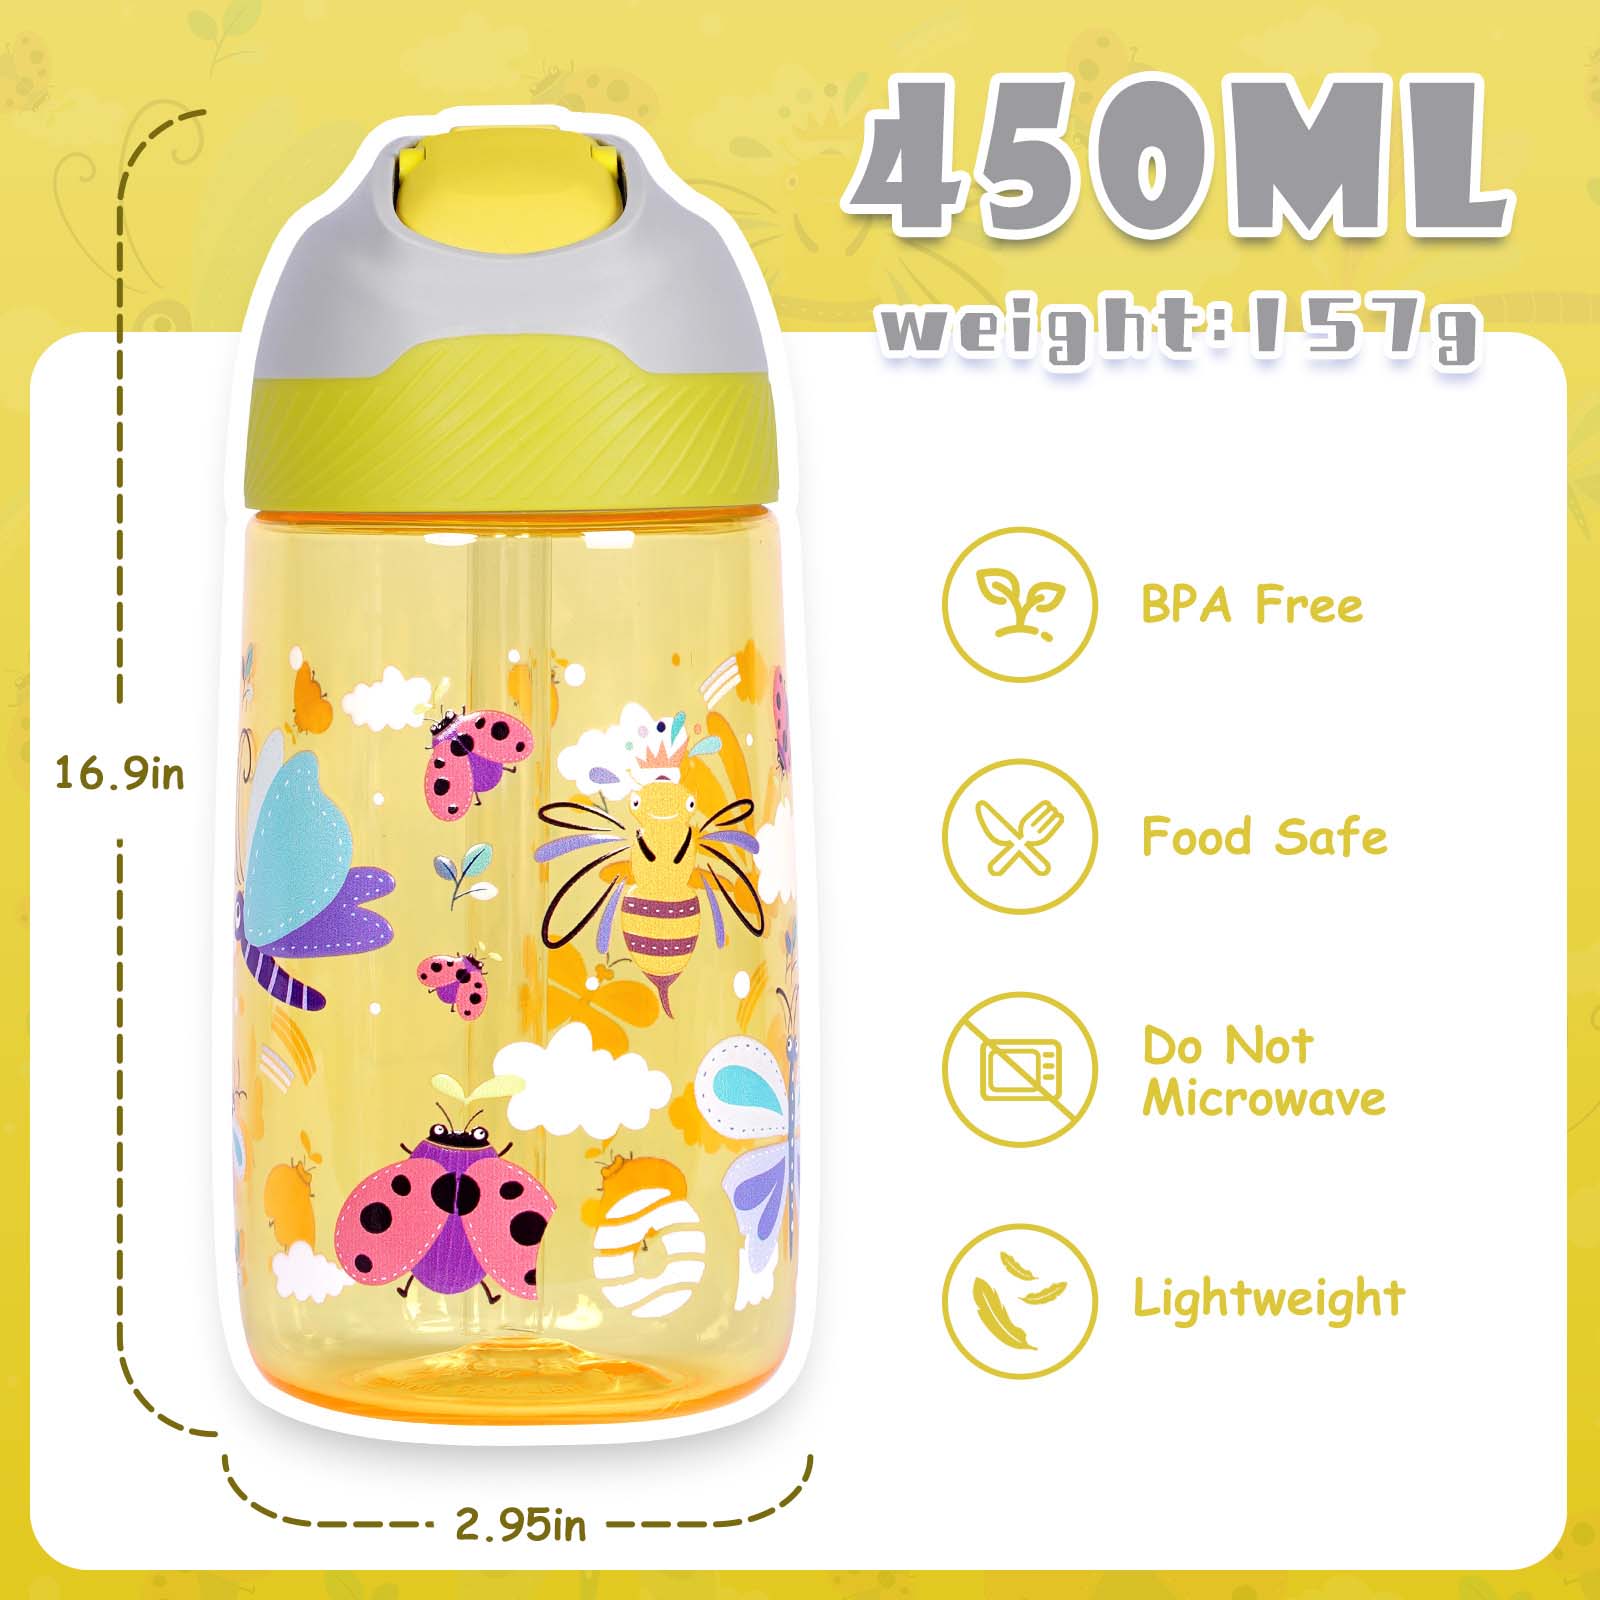 8 oz Spill Proof Cup BPA-Free - Baby King wholesale baby product  manufacturer